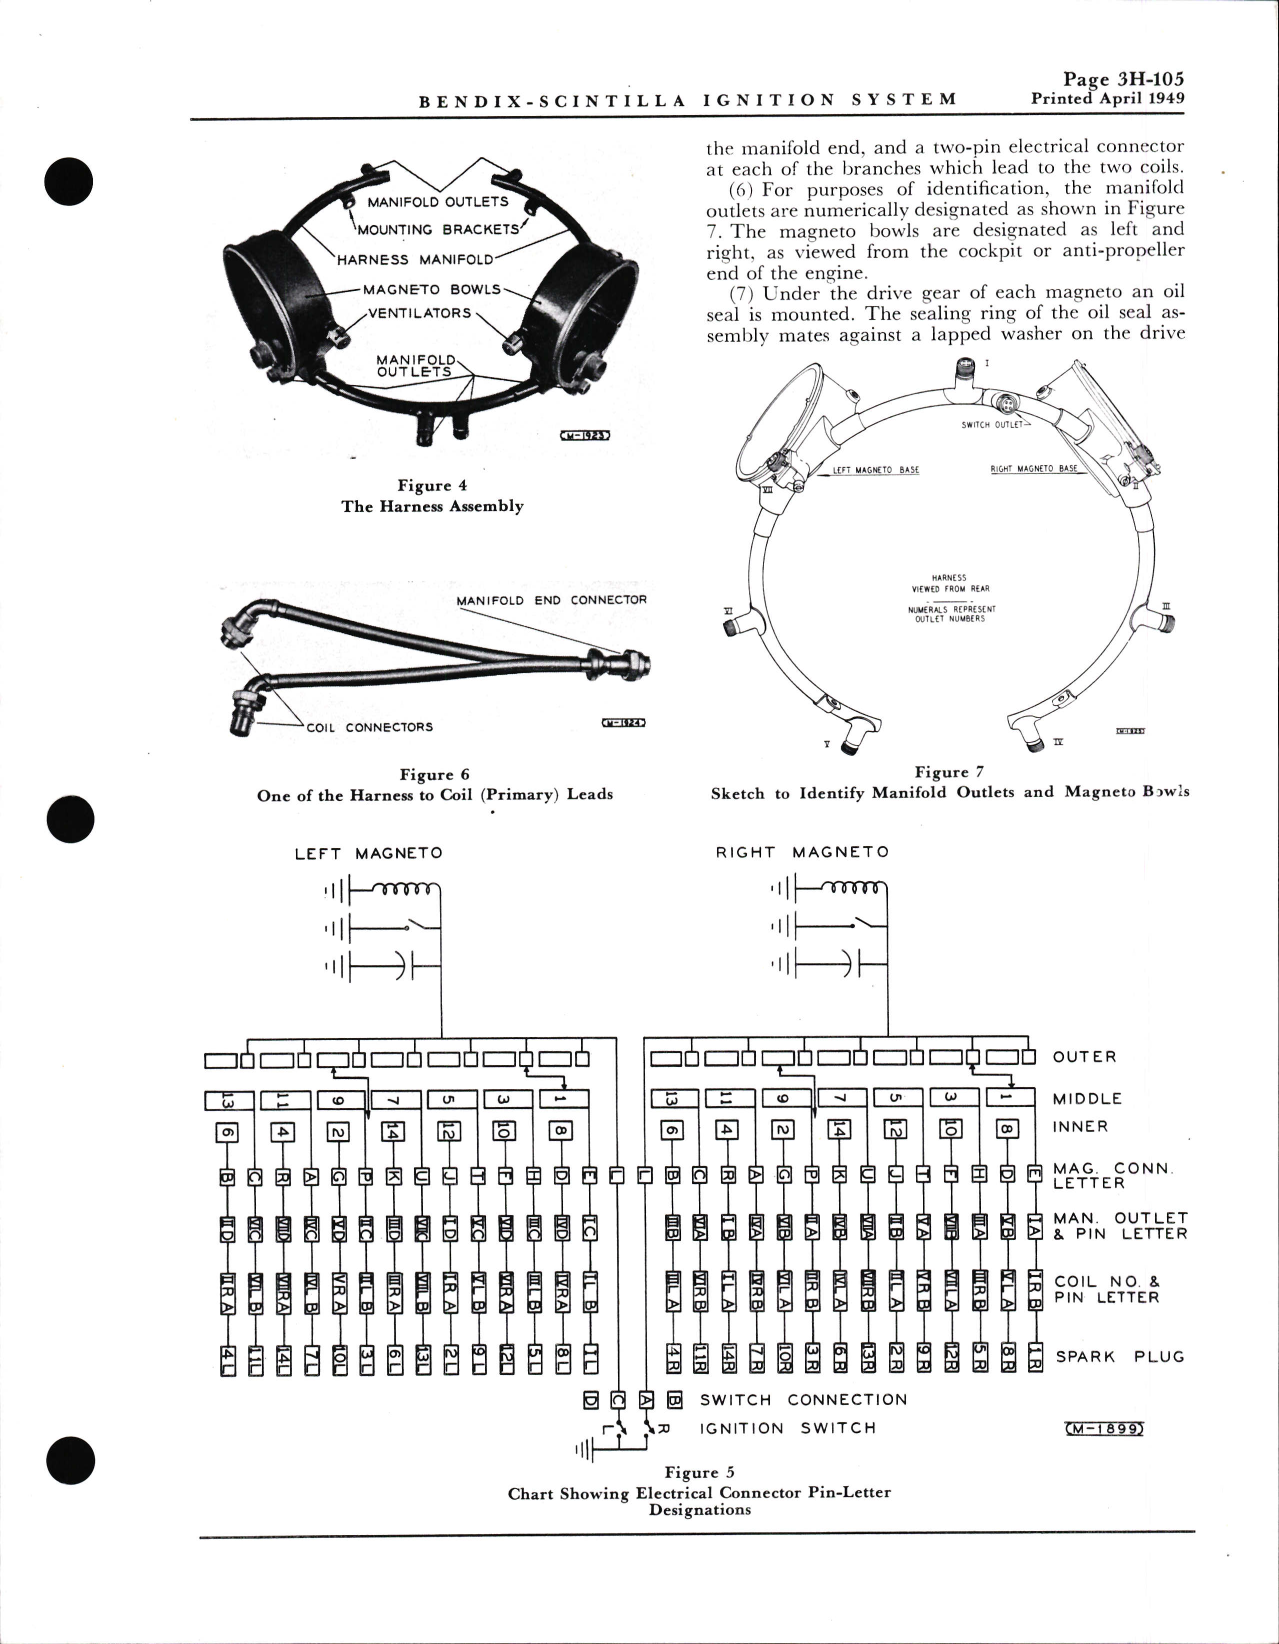 Sample page 5 from AirCorps Library document: Service Instructions for Bendix-Scintilla Low Tension - High Altitude Ignition for Pratt & Whitney R-2180E